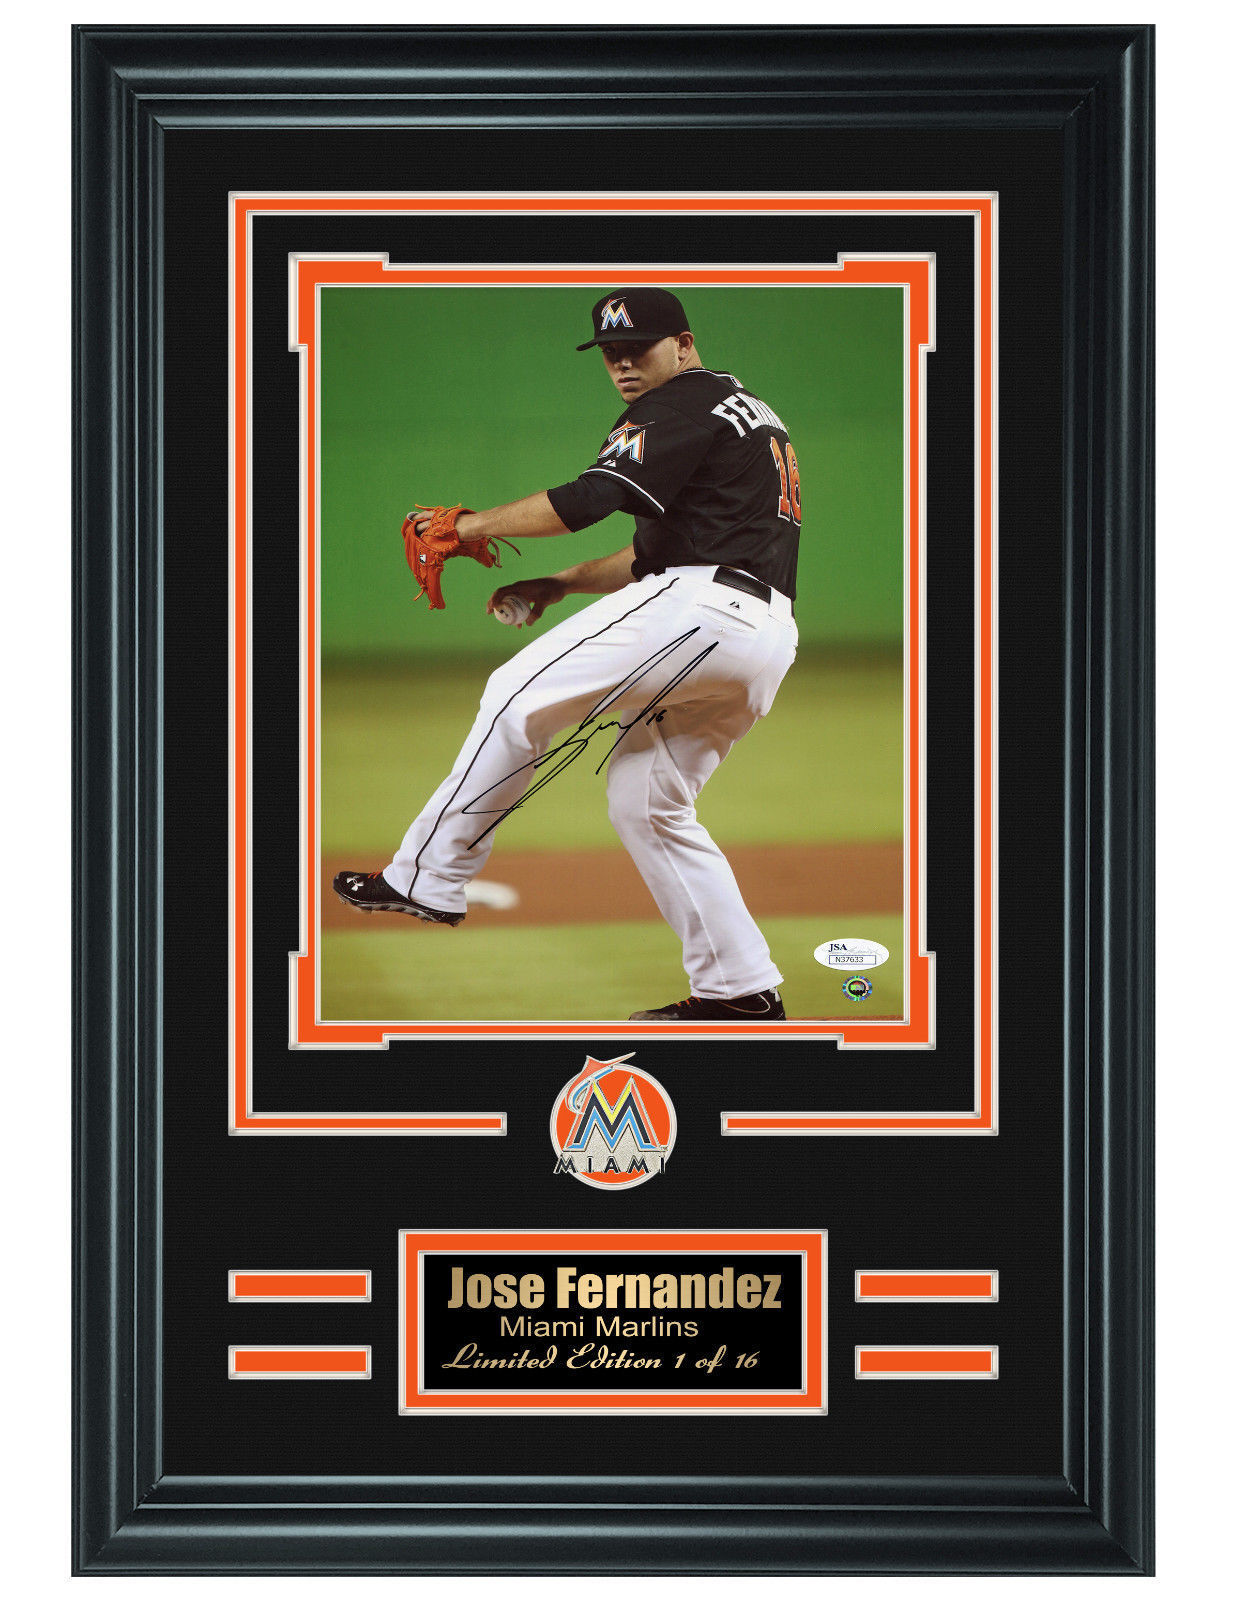 Jose Fernandez Miami Marlins Autographed JSA Authenticated. Limited Edn #8of16